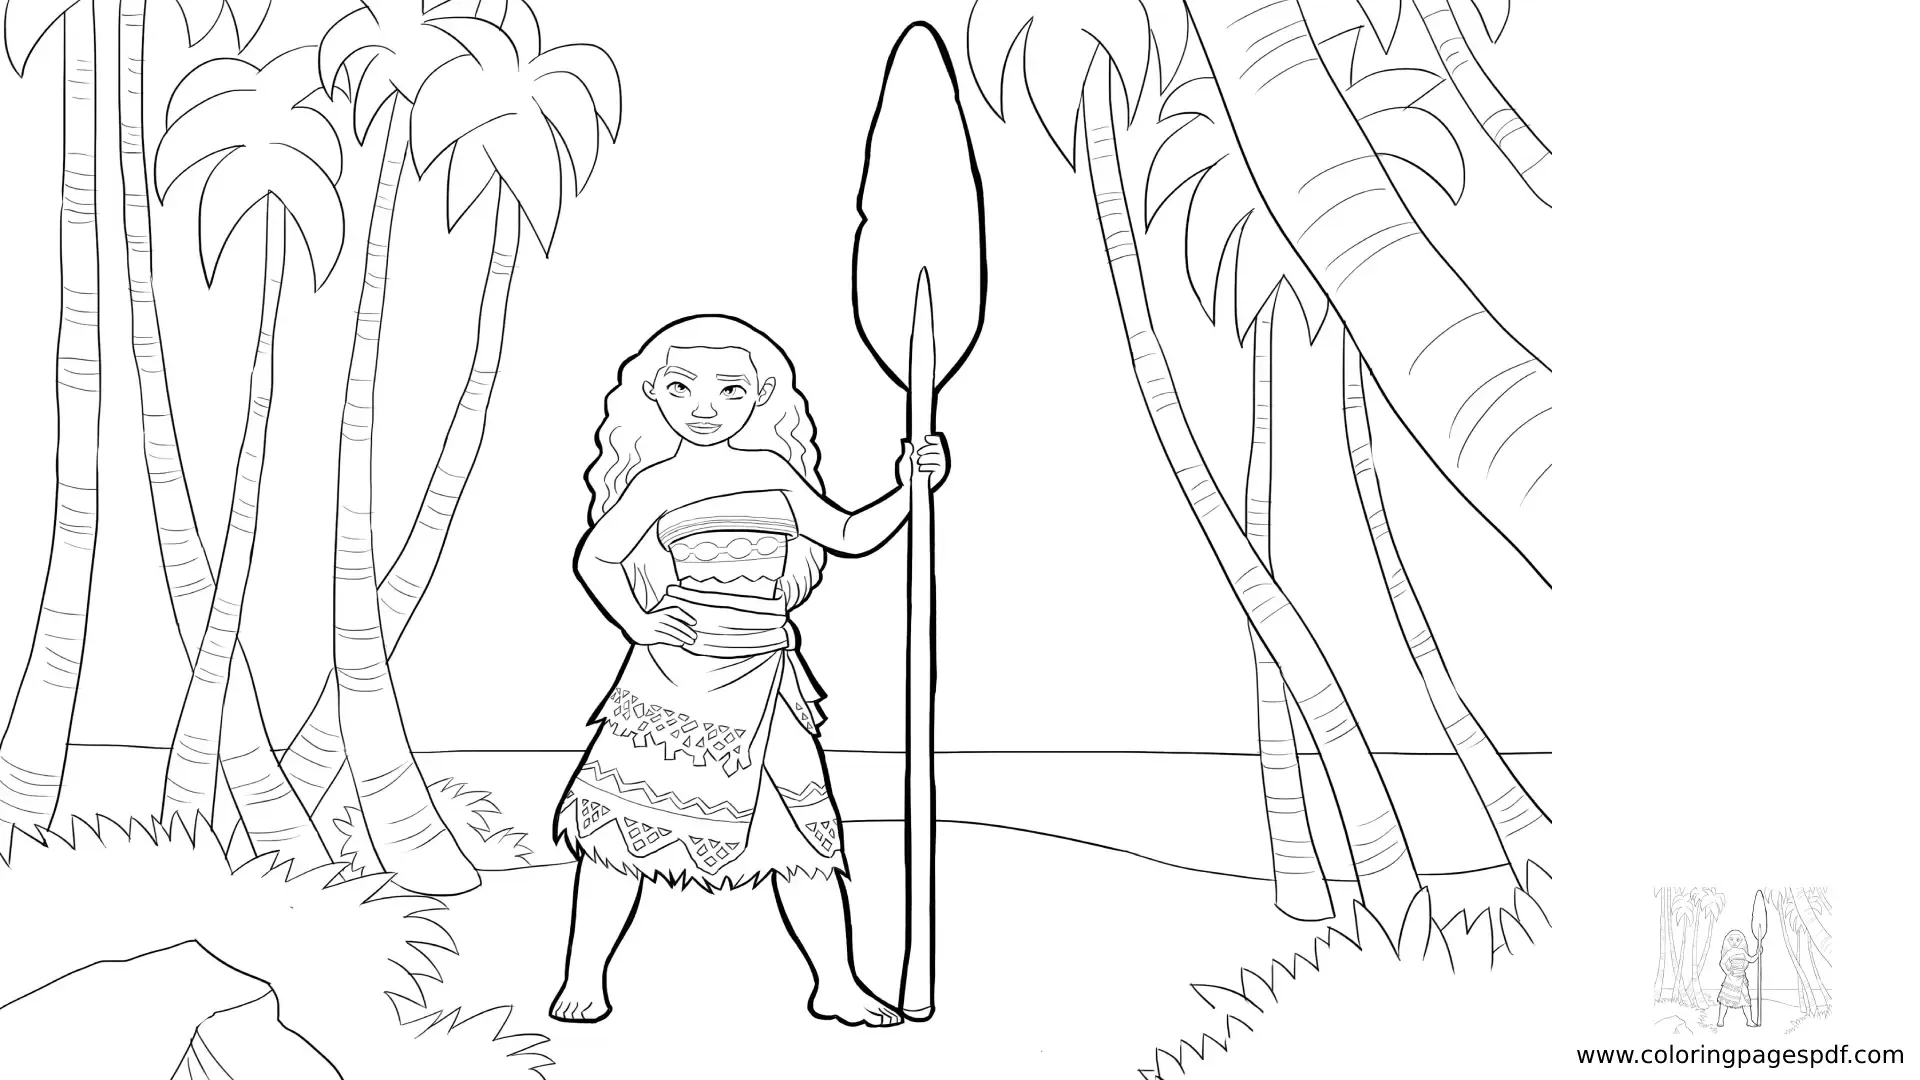 Coloring Pages Of Moana With A Rowing Oar